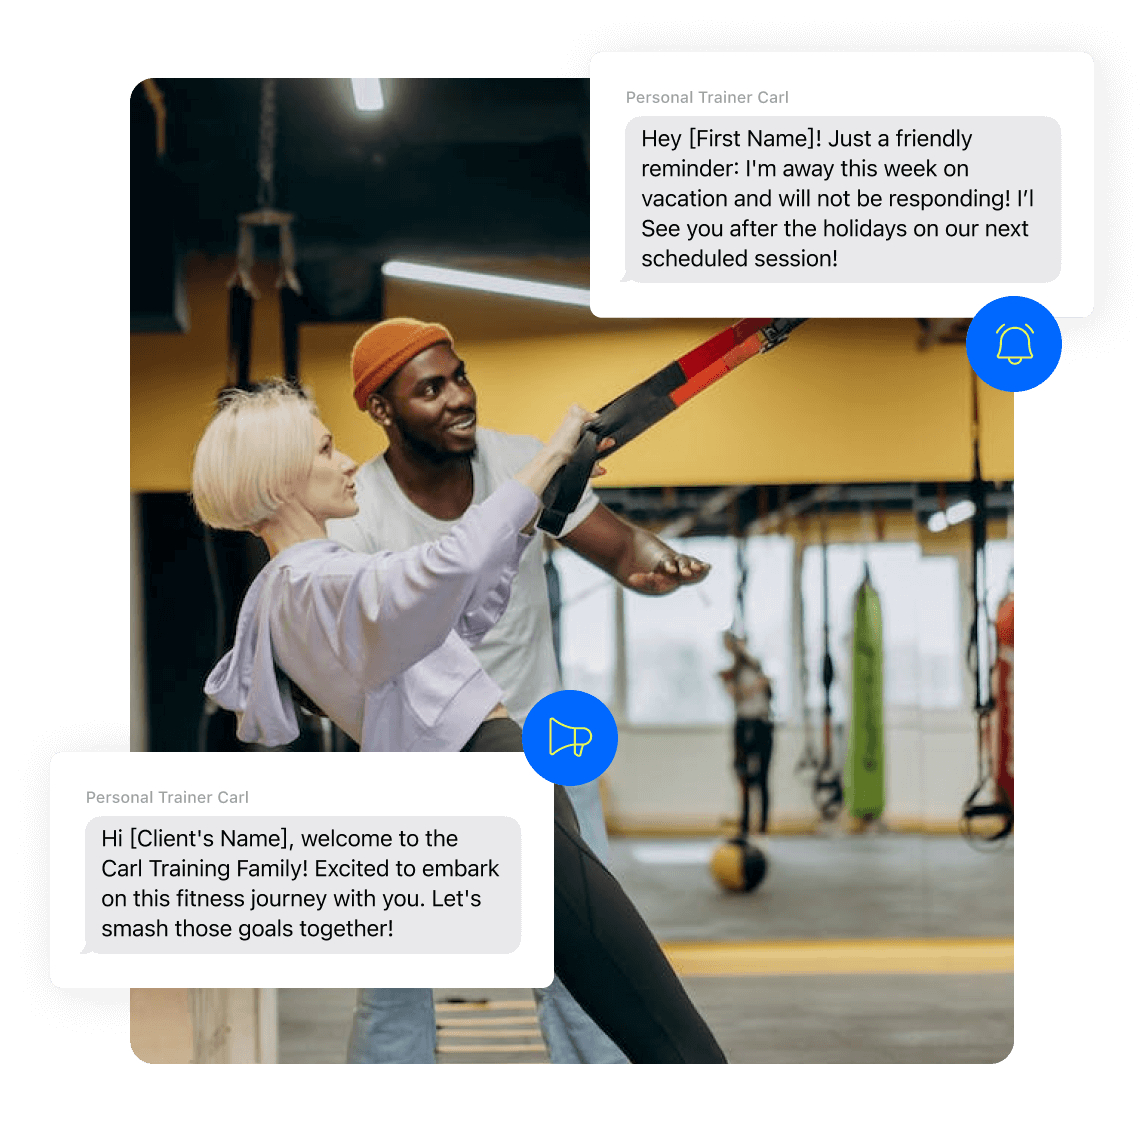 An image of a personal trainer and client interacting, with an overlay of a text message conversation, showcasing personalized bulk SMS services for fitness professionals.